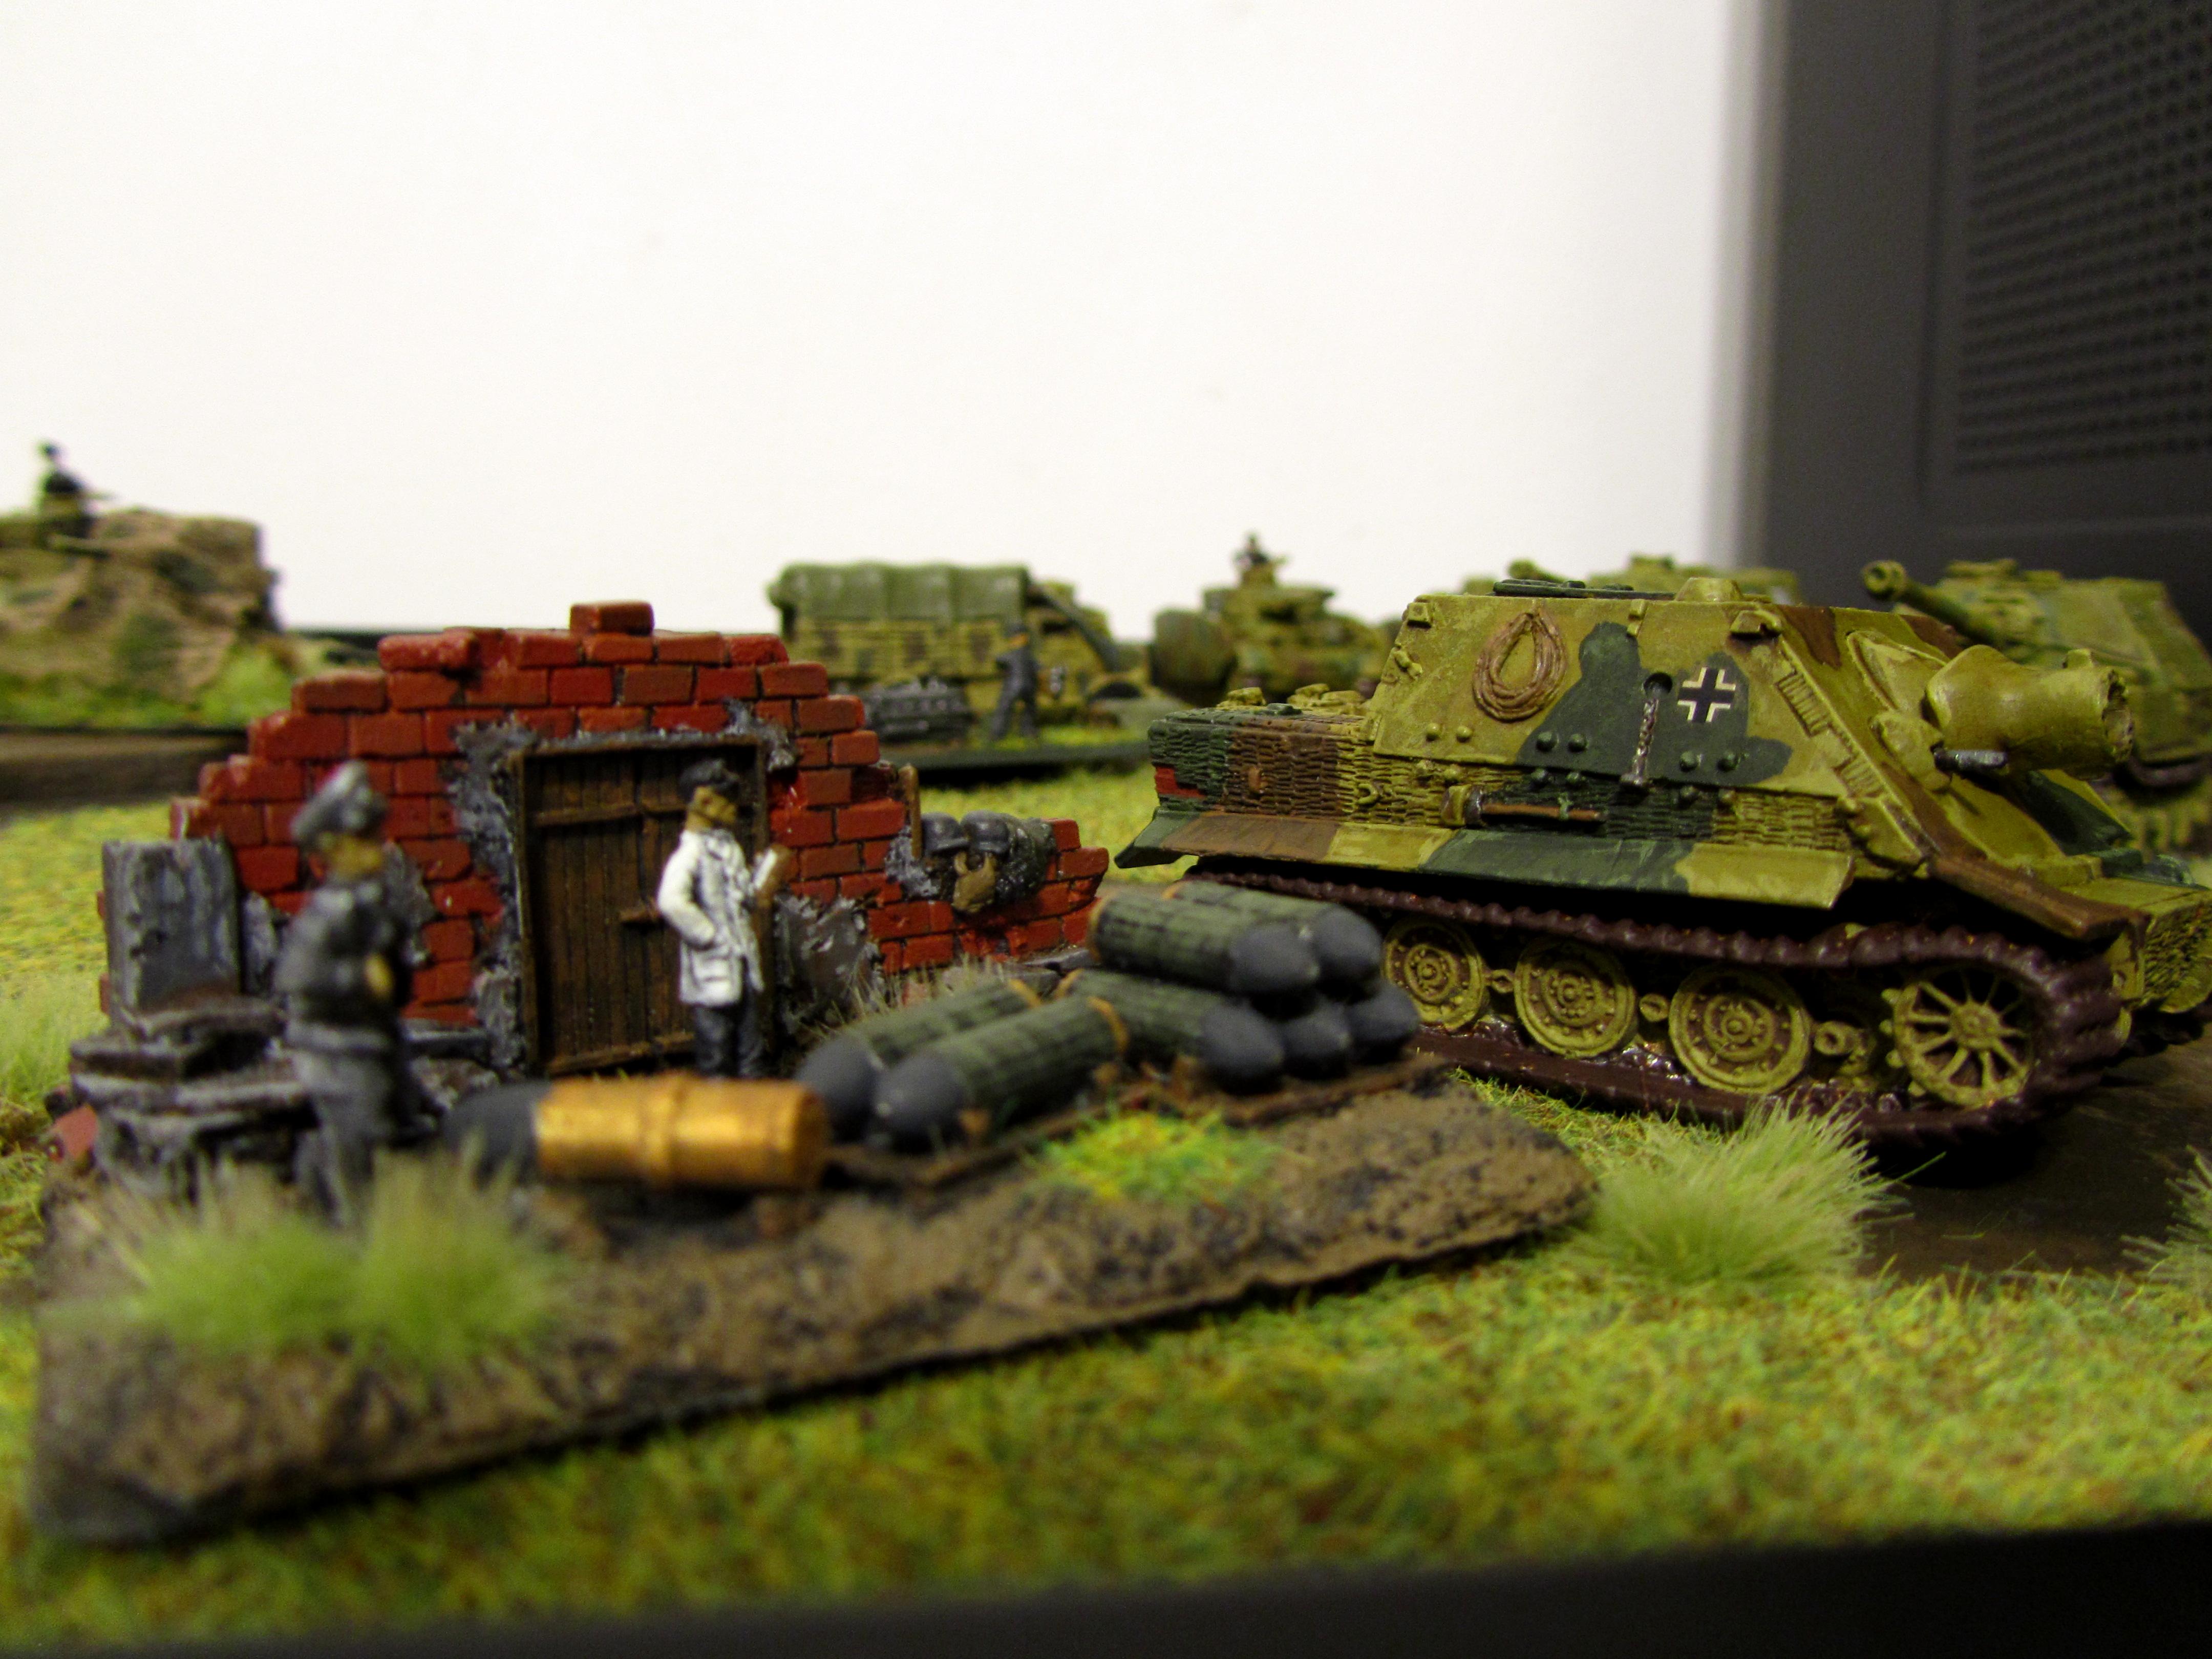 STURM TIGER AND OBJECTIVE